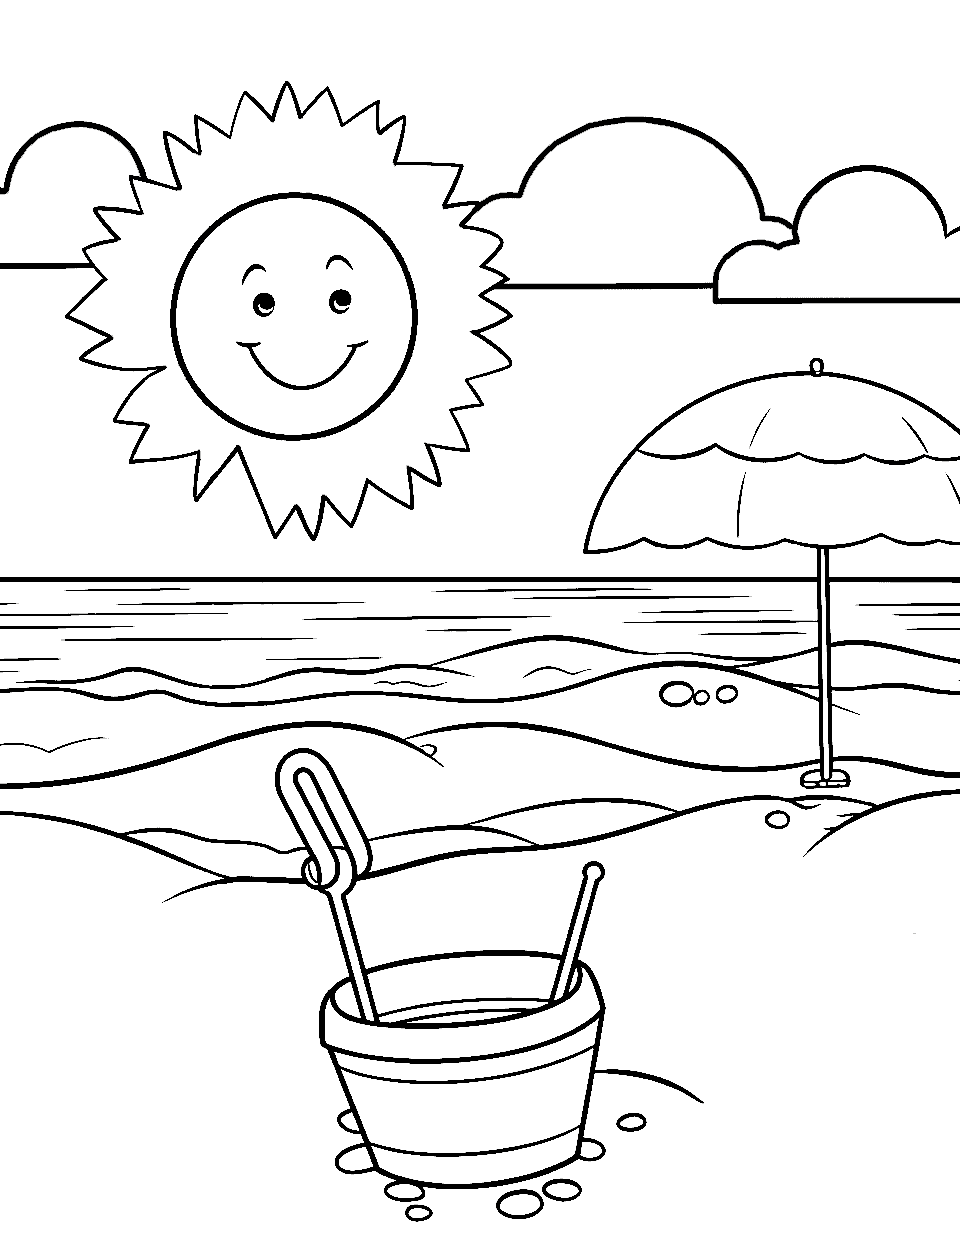 Coloring Pages  Free Printable Chair Coloring Page for Kids